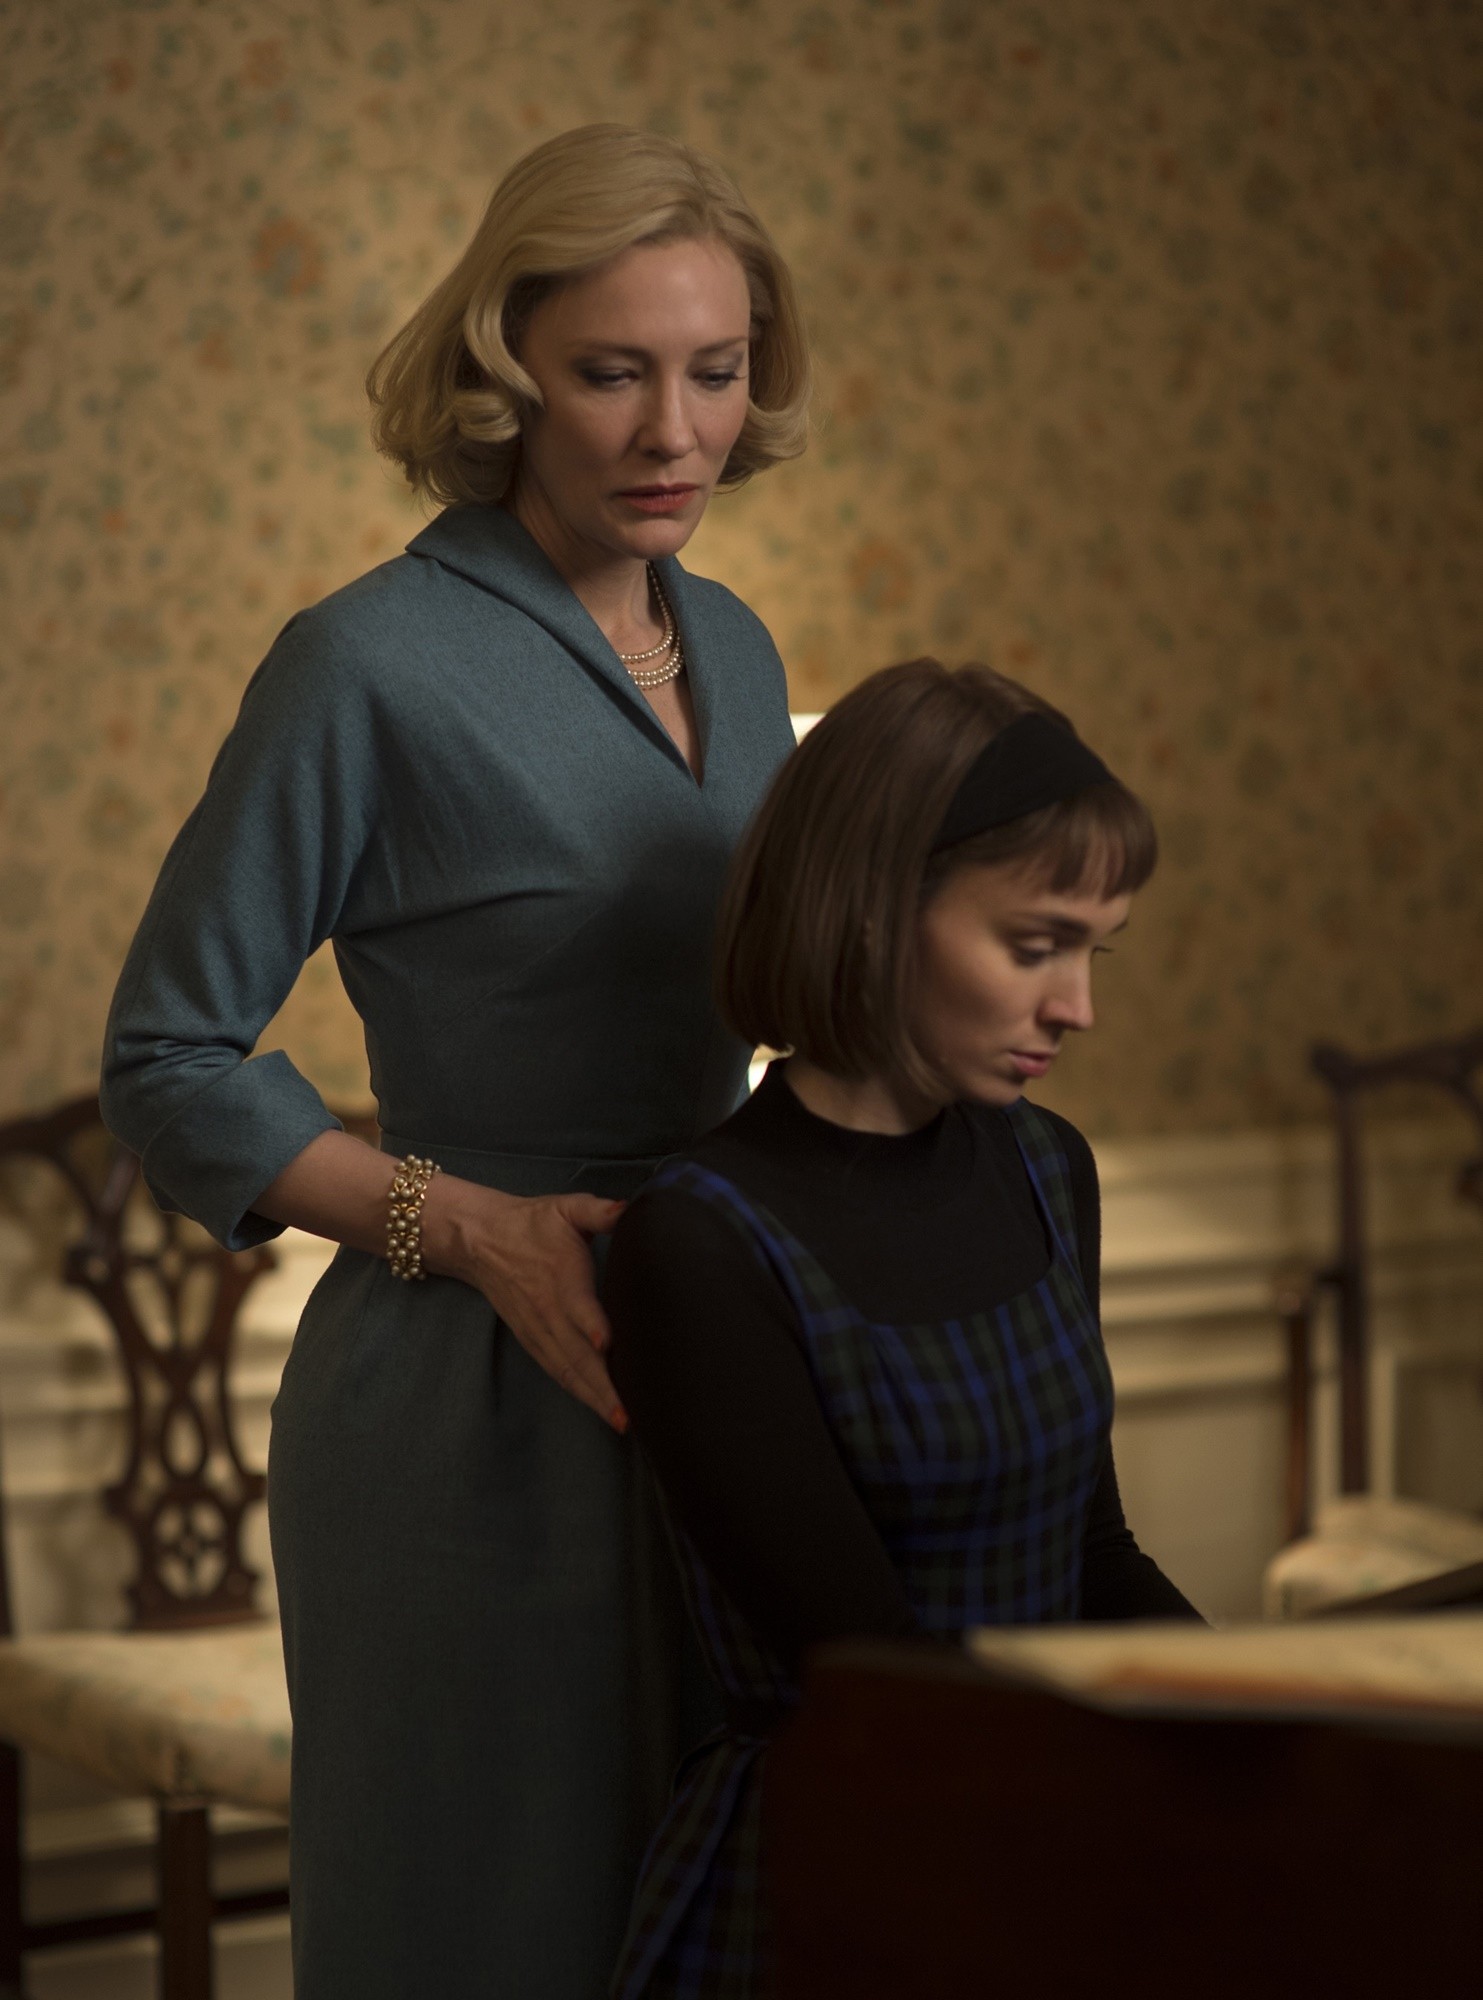 Cate Blanchett stars as Carol Aird and Rooney Mara stars as Therese Belivet in The Weinstein Company's Carol (2015)